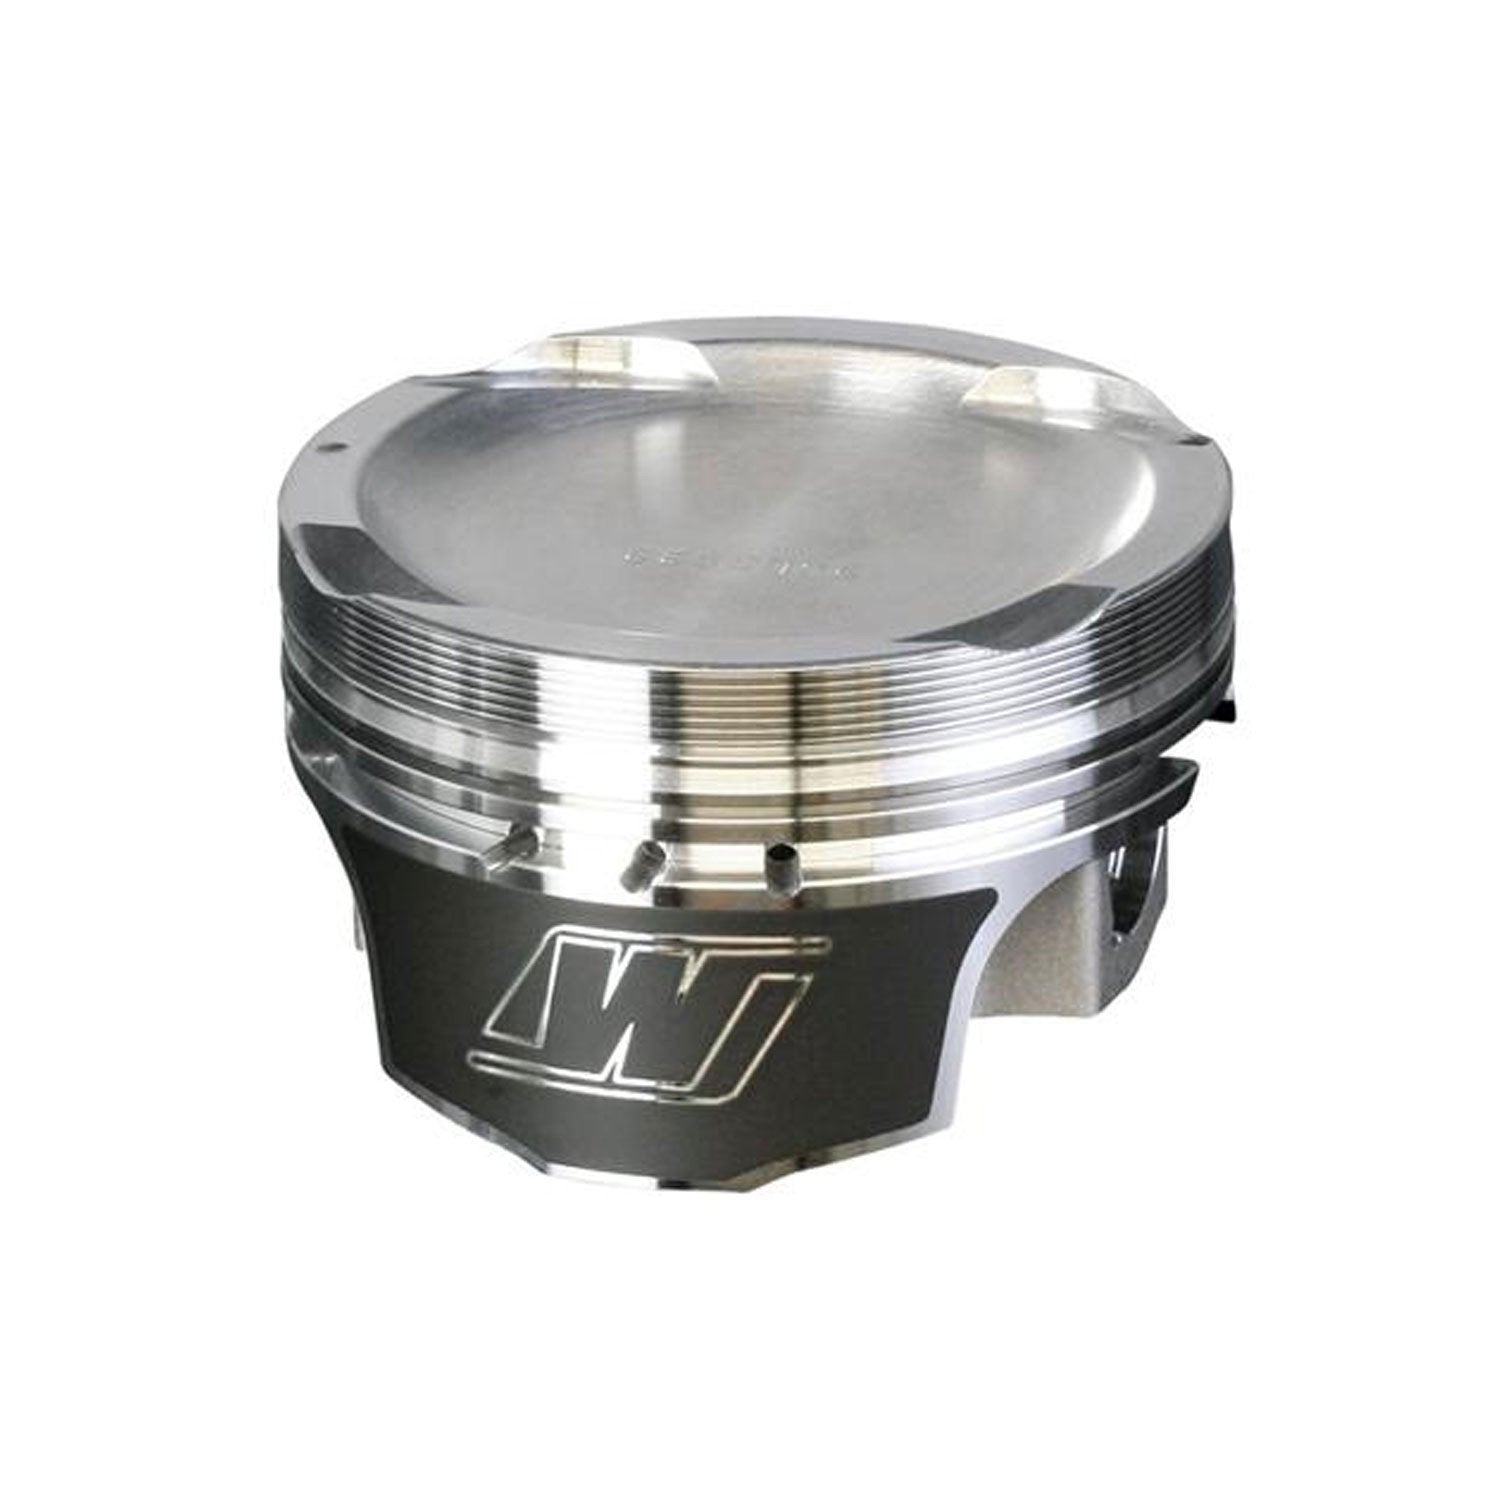 WISECO SPORT COMPACT SERIES 1400HD PISTONS | MULTIPLE 7 BOLT 4G63 FITMENTS - JD Customs U.S.A